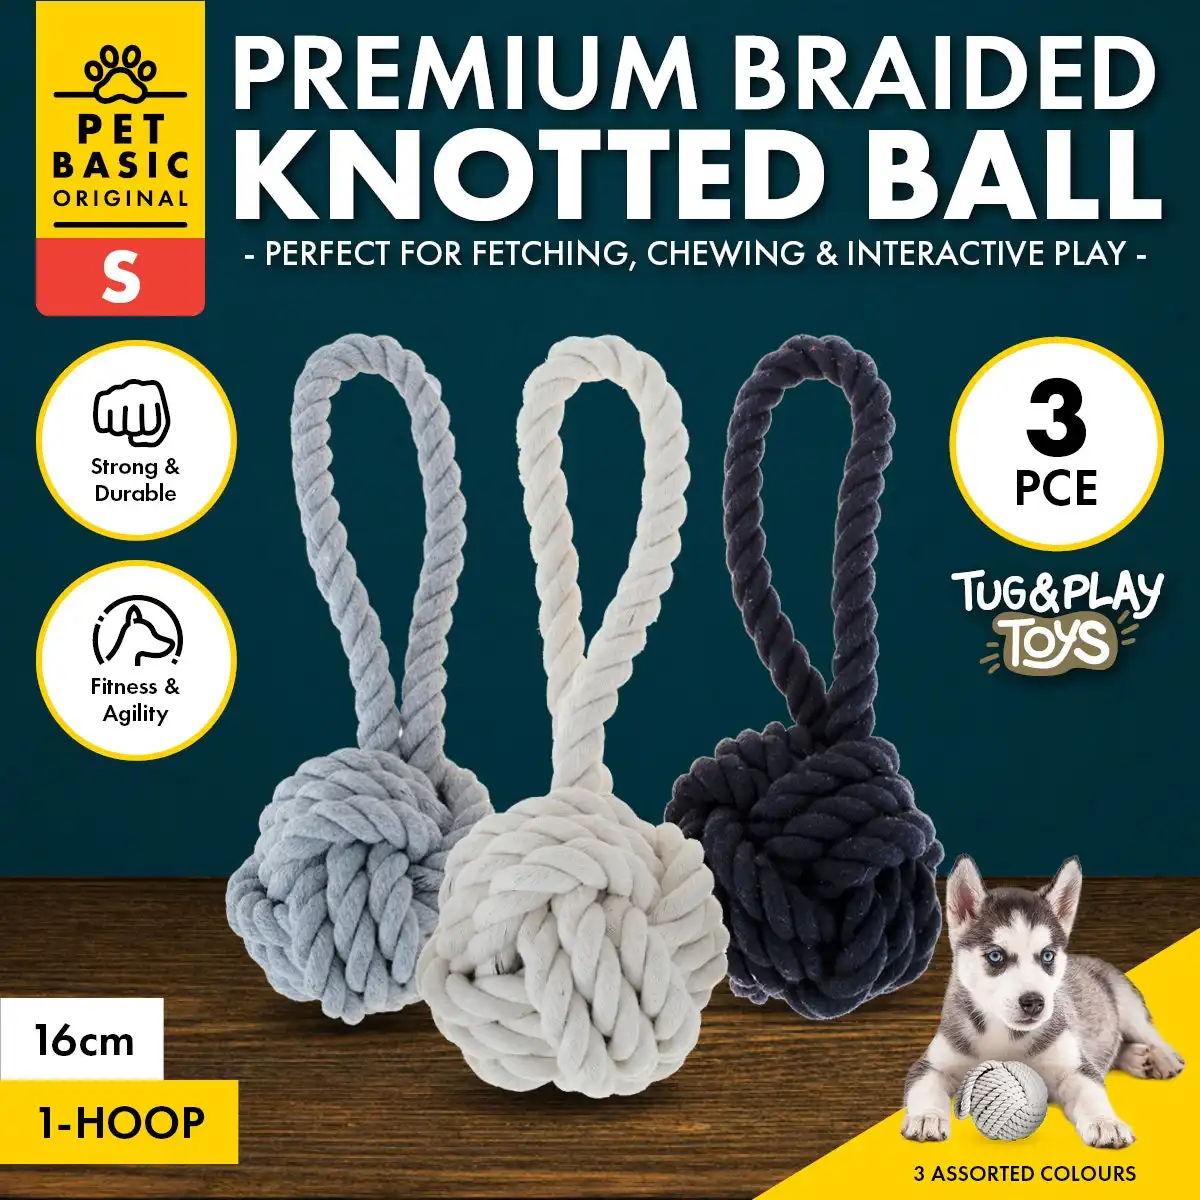 Pet Basic® 3PCE Premium Braided Rope Knotted Ball Small Natural Fibres 16cm